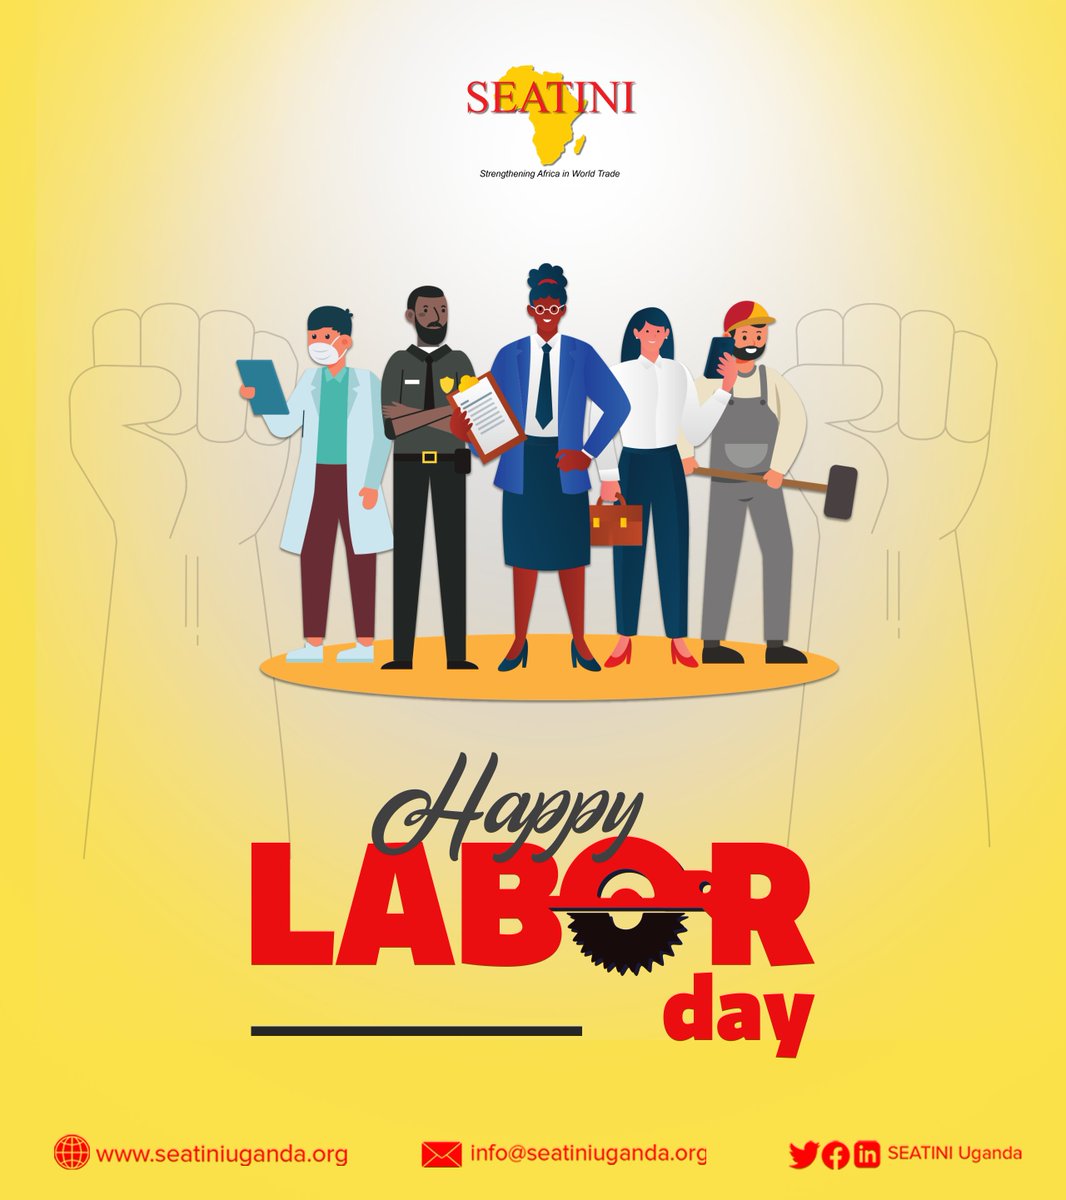 On this Labour Day, we commend the effort of all of the workers who are integral in sustaining the industries of Uganda. We also emphasize our commitment to advocating for a balance between the privileges of investors and the protections that are due to workers. #HappyLabourDay